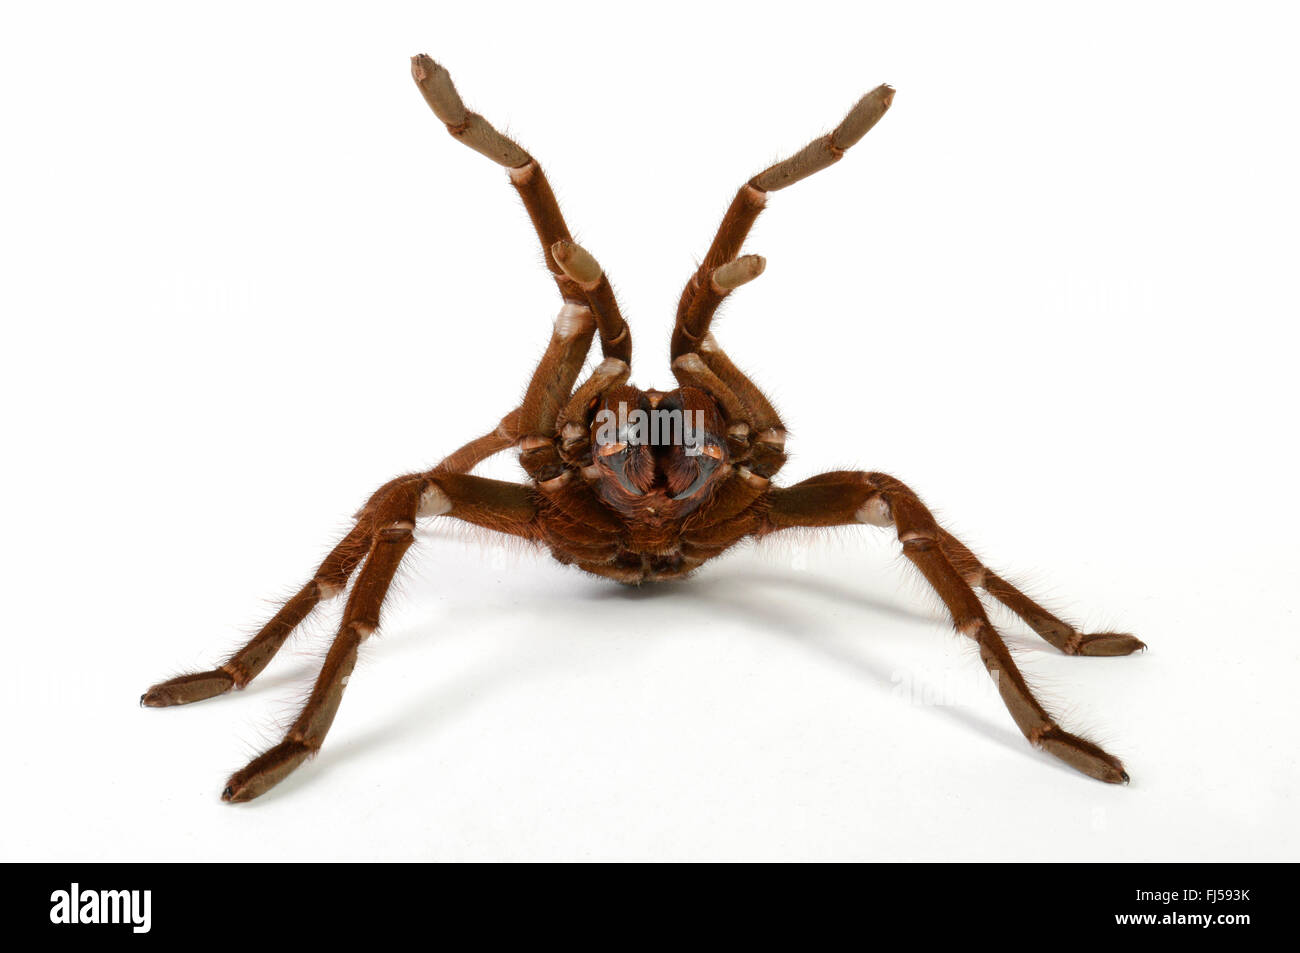 Goliath pinkfoot tarantula, Pinkfoot Goliath Birdeater Tarantula, Pinktoe Goliath Birdeater Tarantula  (Pseudotheraphosa apophysis, Theraphosa apophysis), in defense posture, cut-out Stock Photo